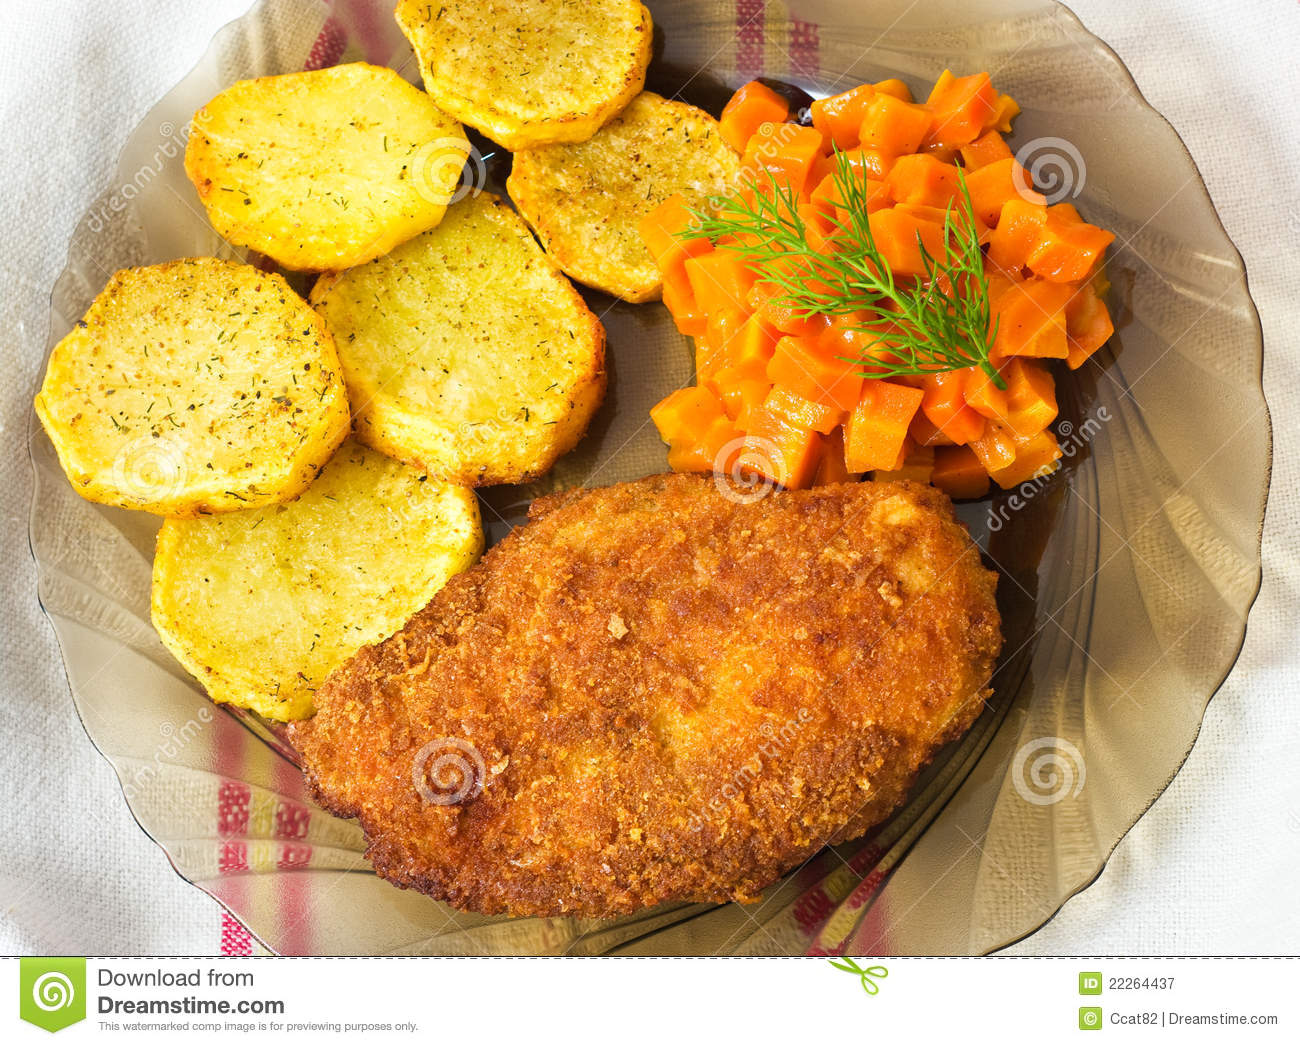 Parmesan Breaded Chicken Breast Royalty Free Stock Photography   Image